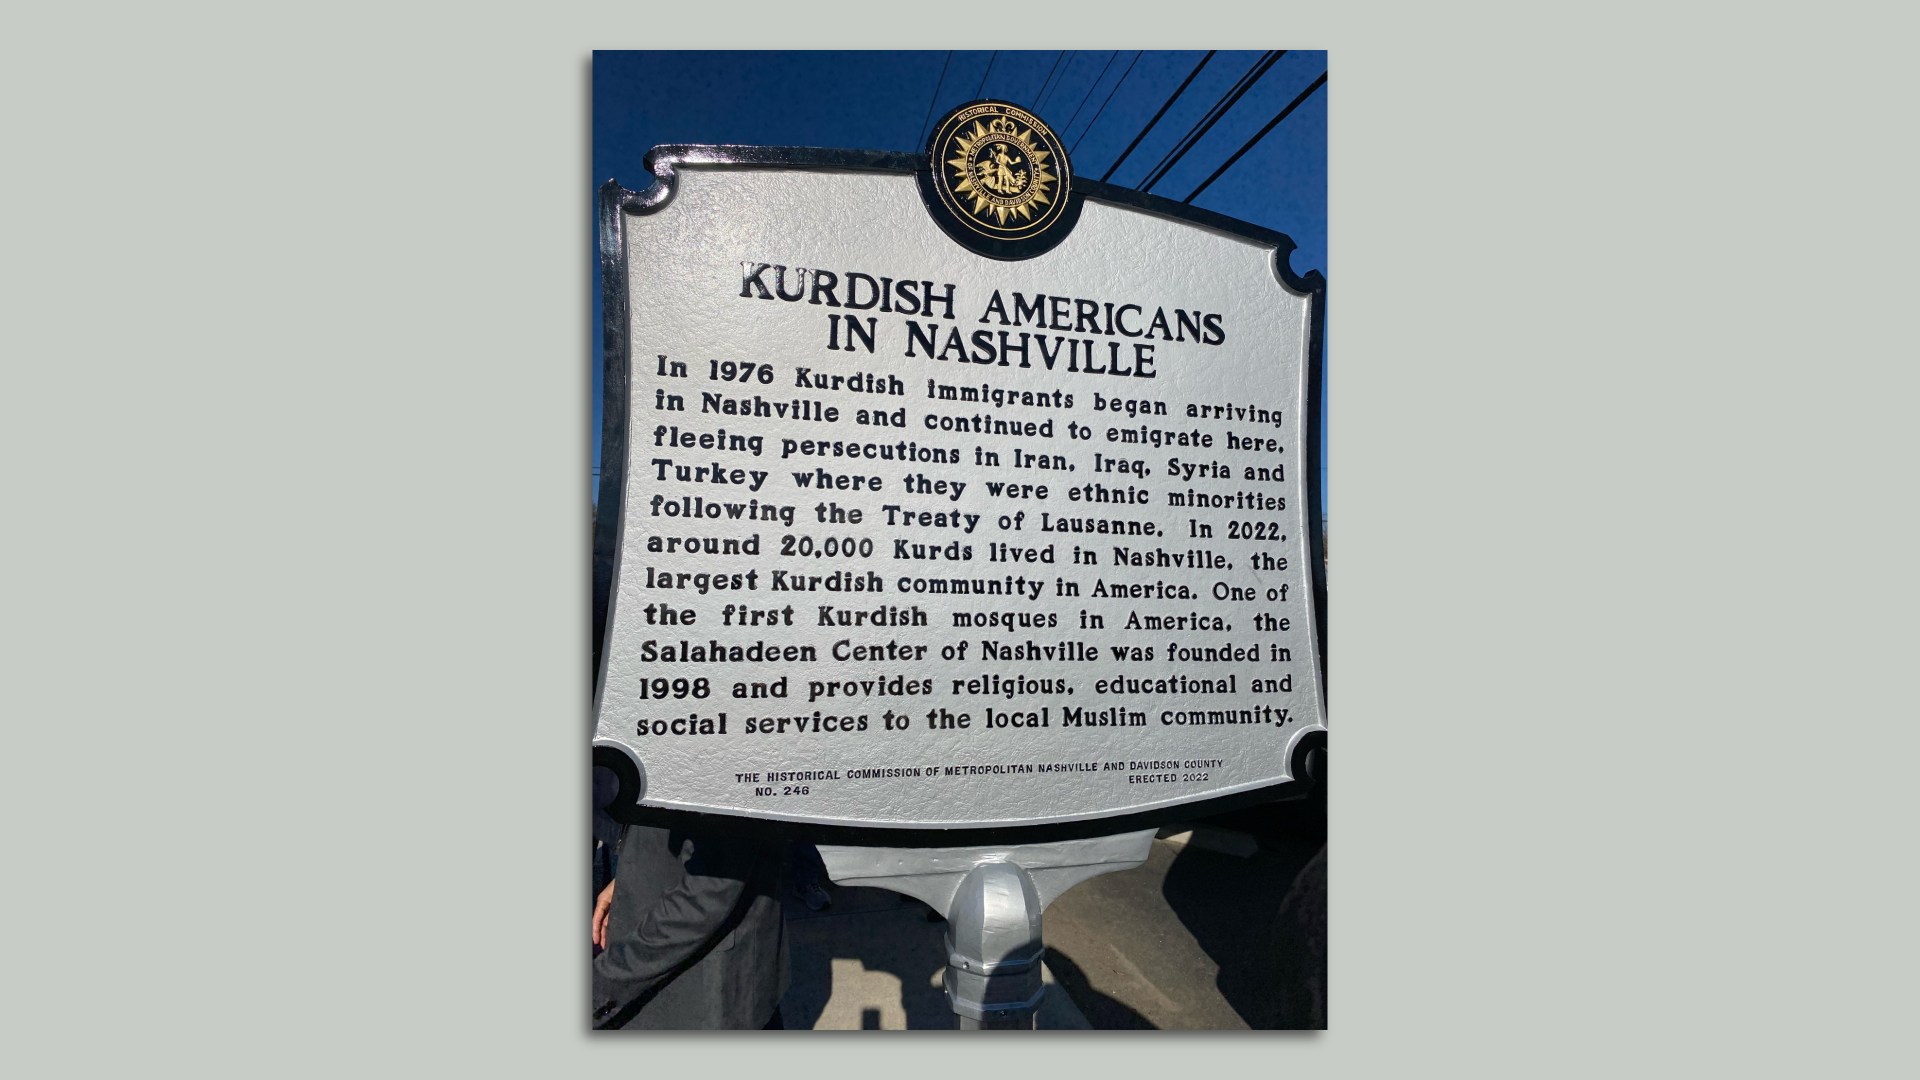 A historical marker describing how Kurdish people moved to Nashville.